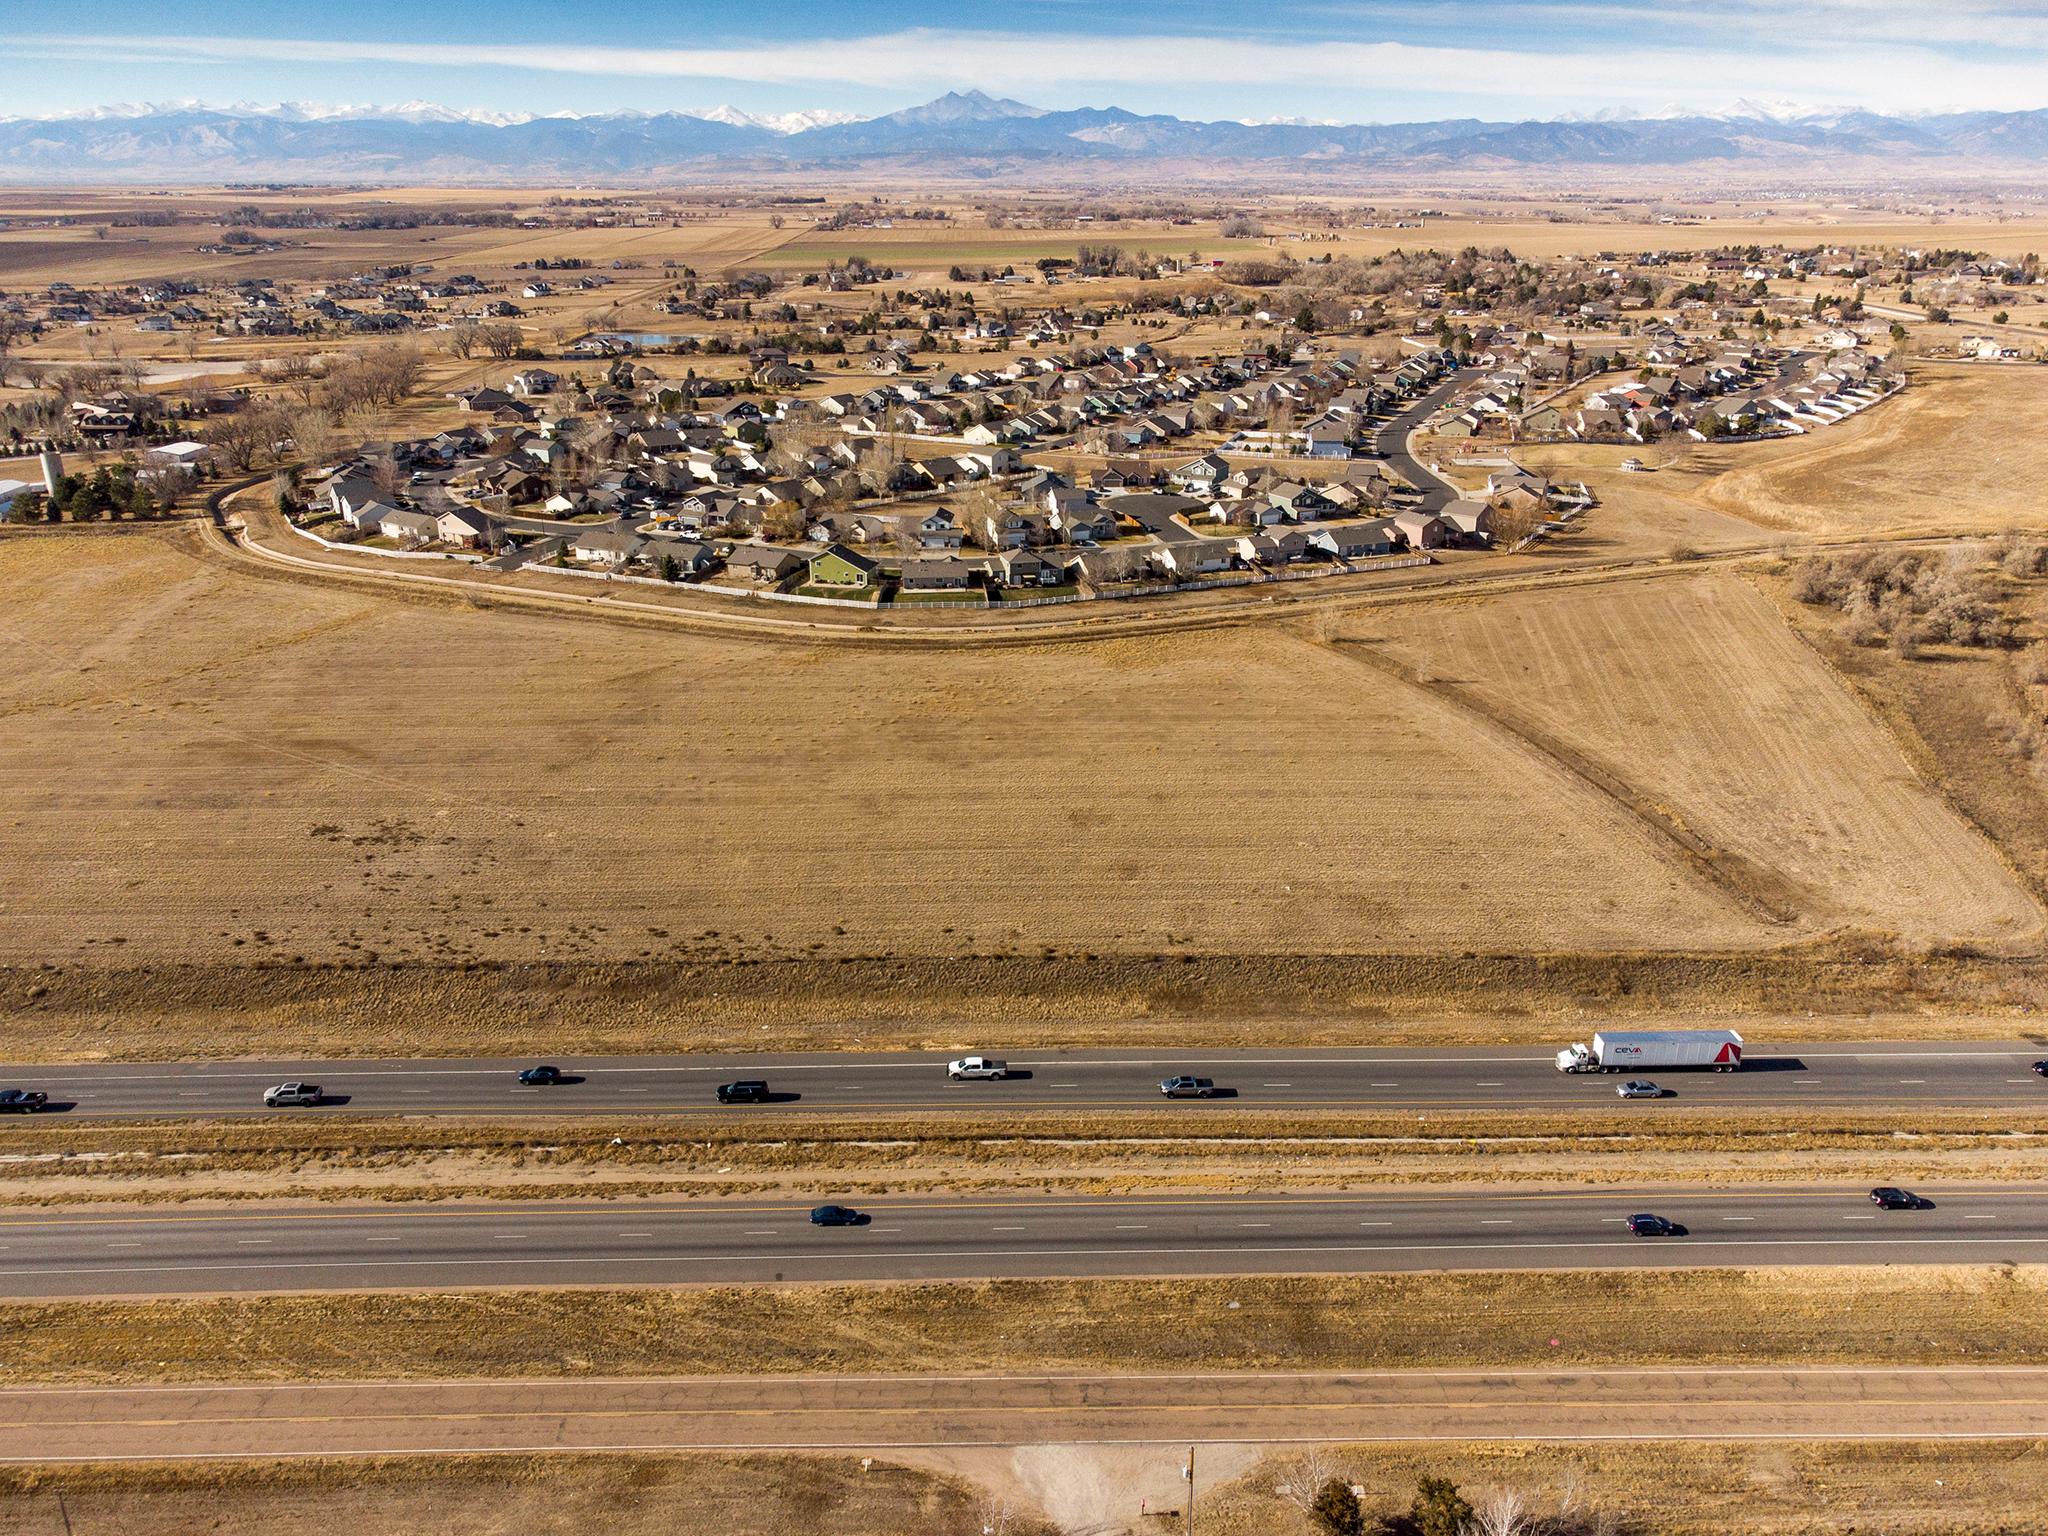 A housing development in Weld County that sits close to I-25. Dec. 11, 2021.